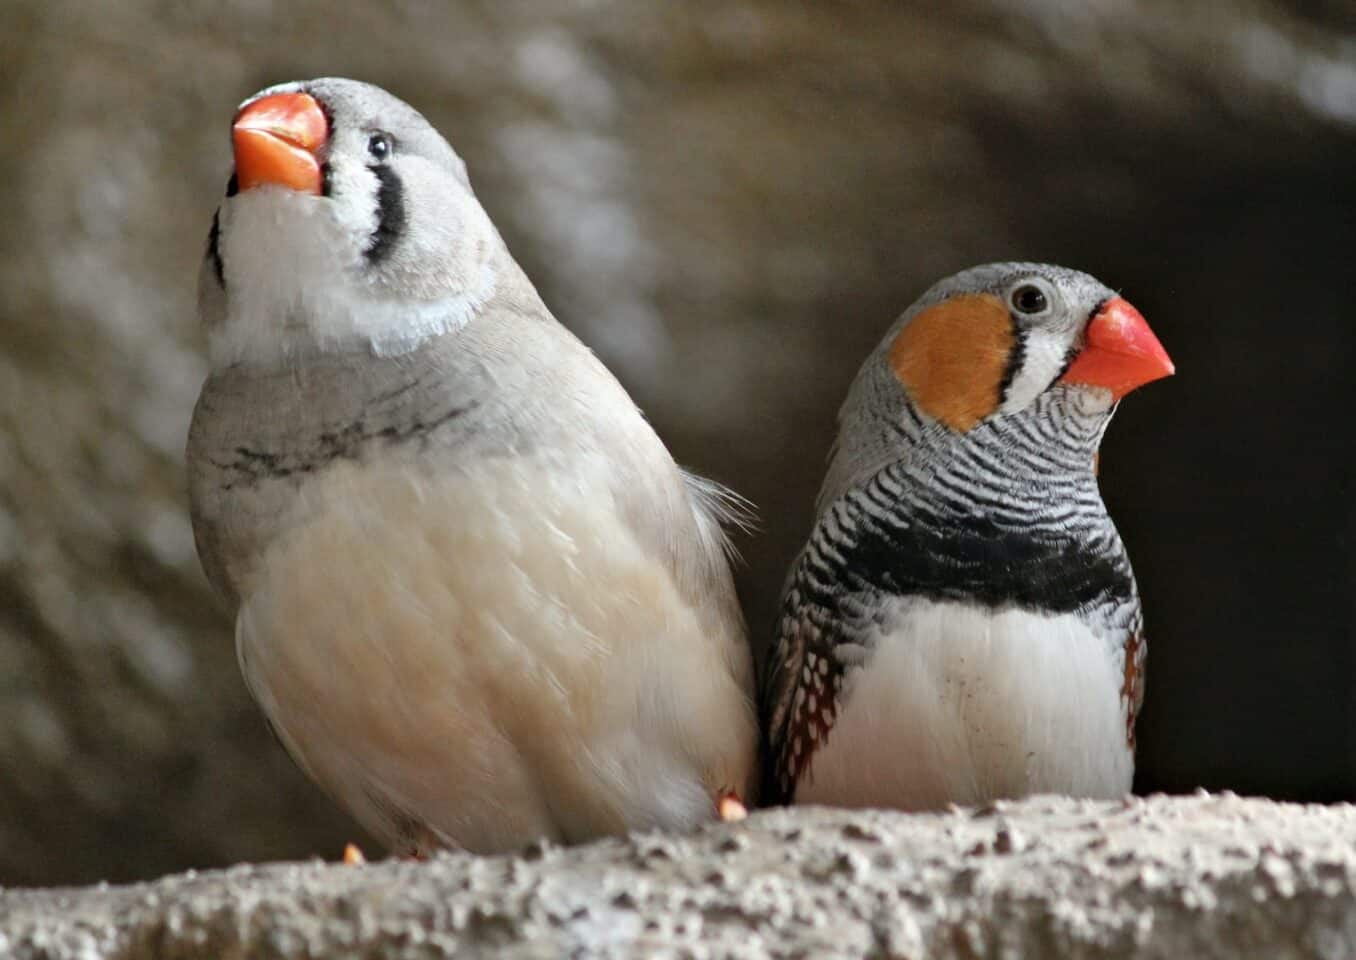 gray-white-and-black finches